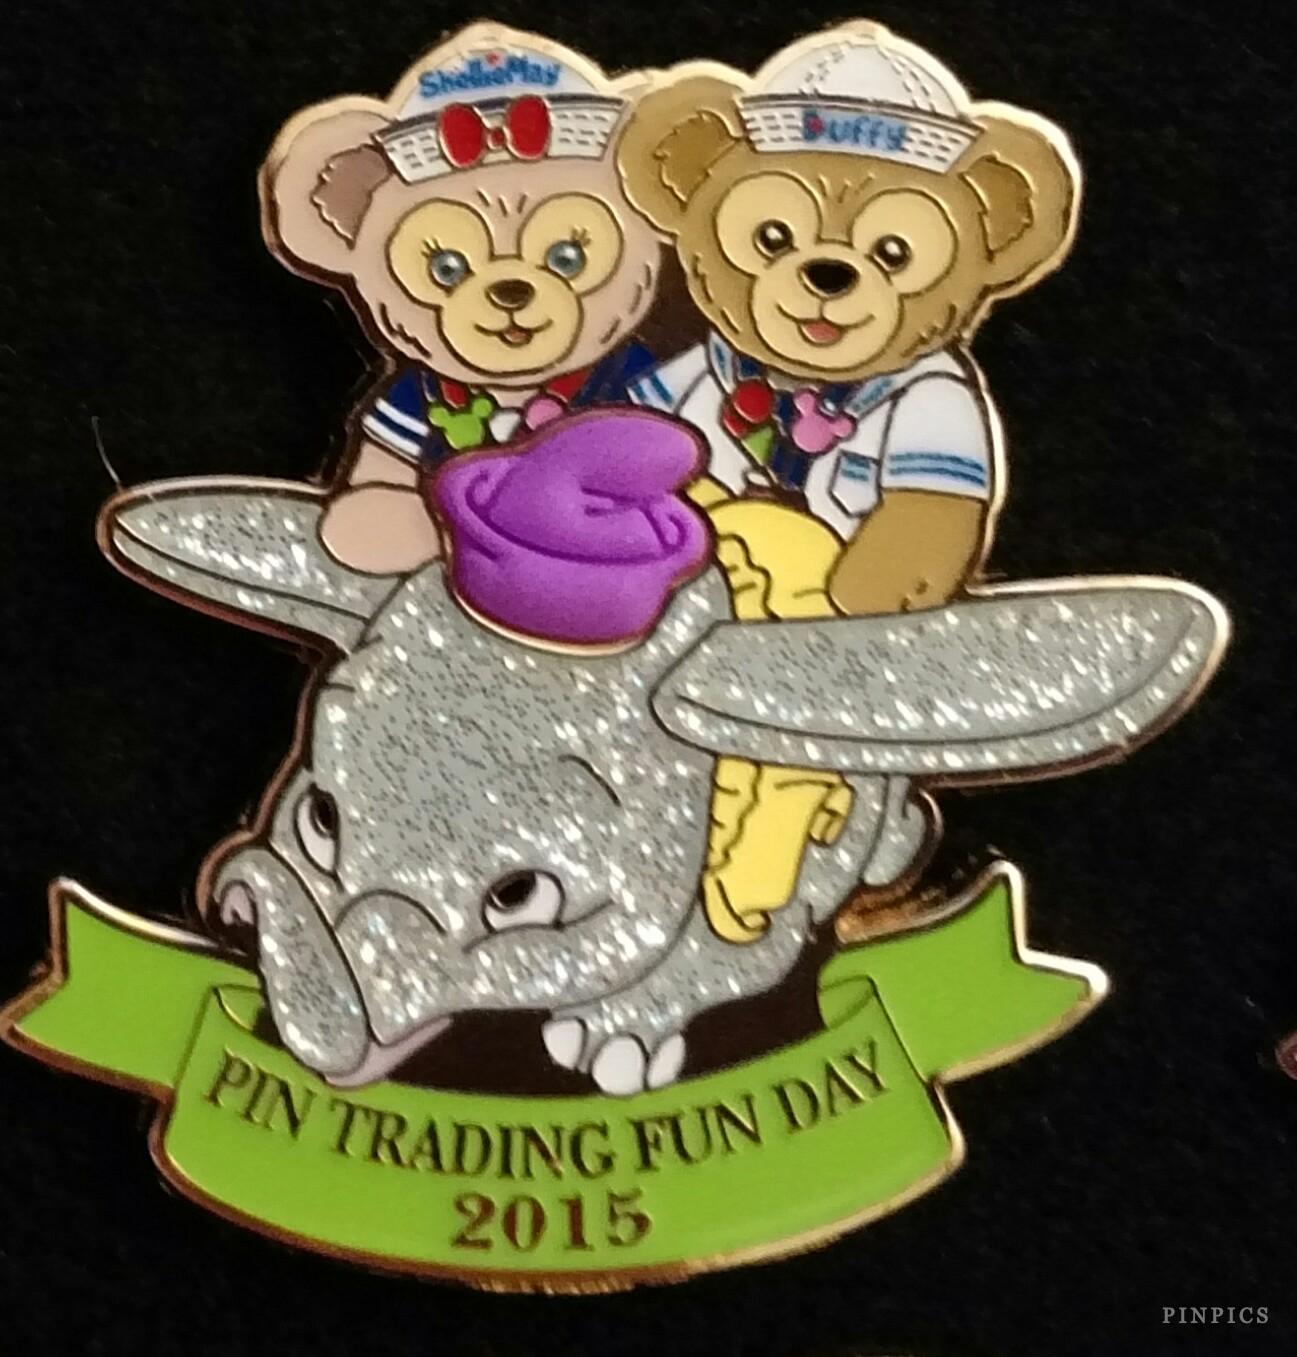 HKDL - Pin Trading Fun Days 2015 - Duffy & ShellieMay Dumbo the Flying Elephant